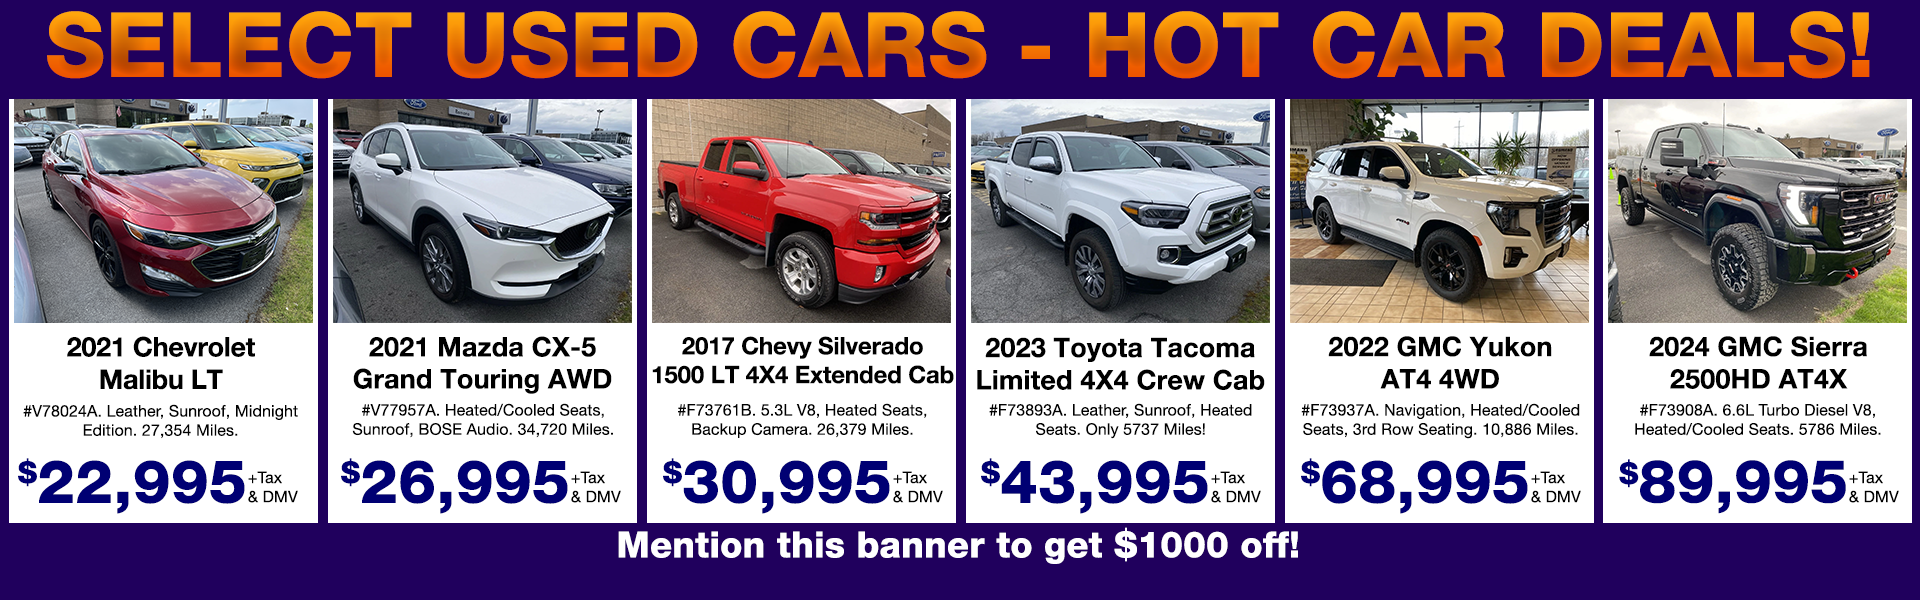 Great Deals on Used Cars